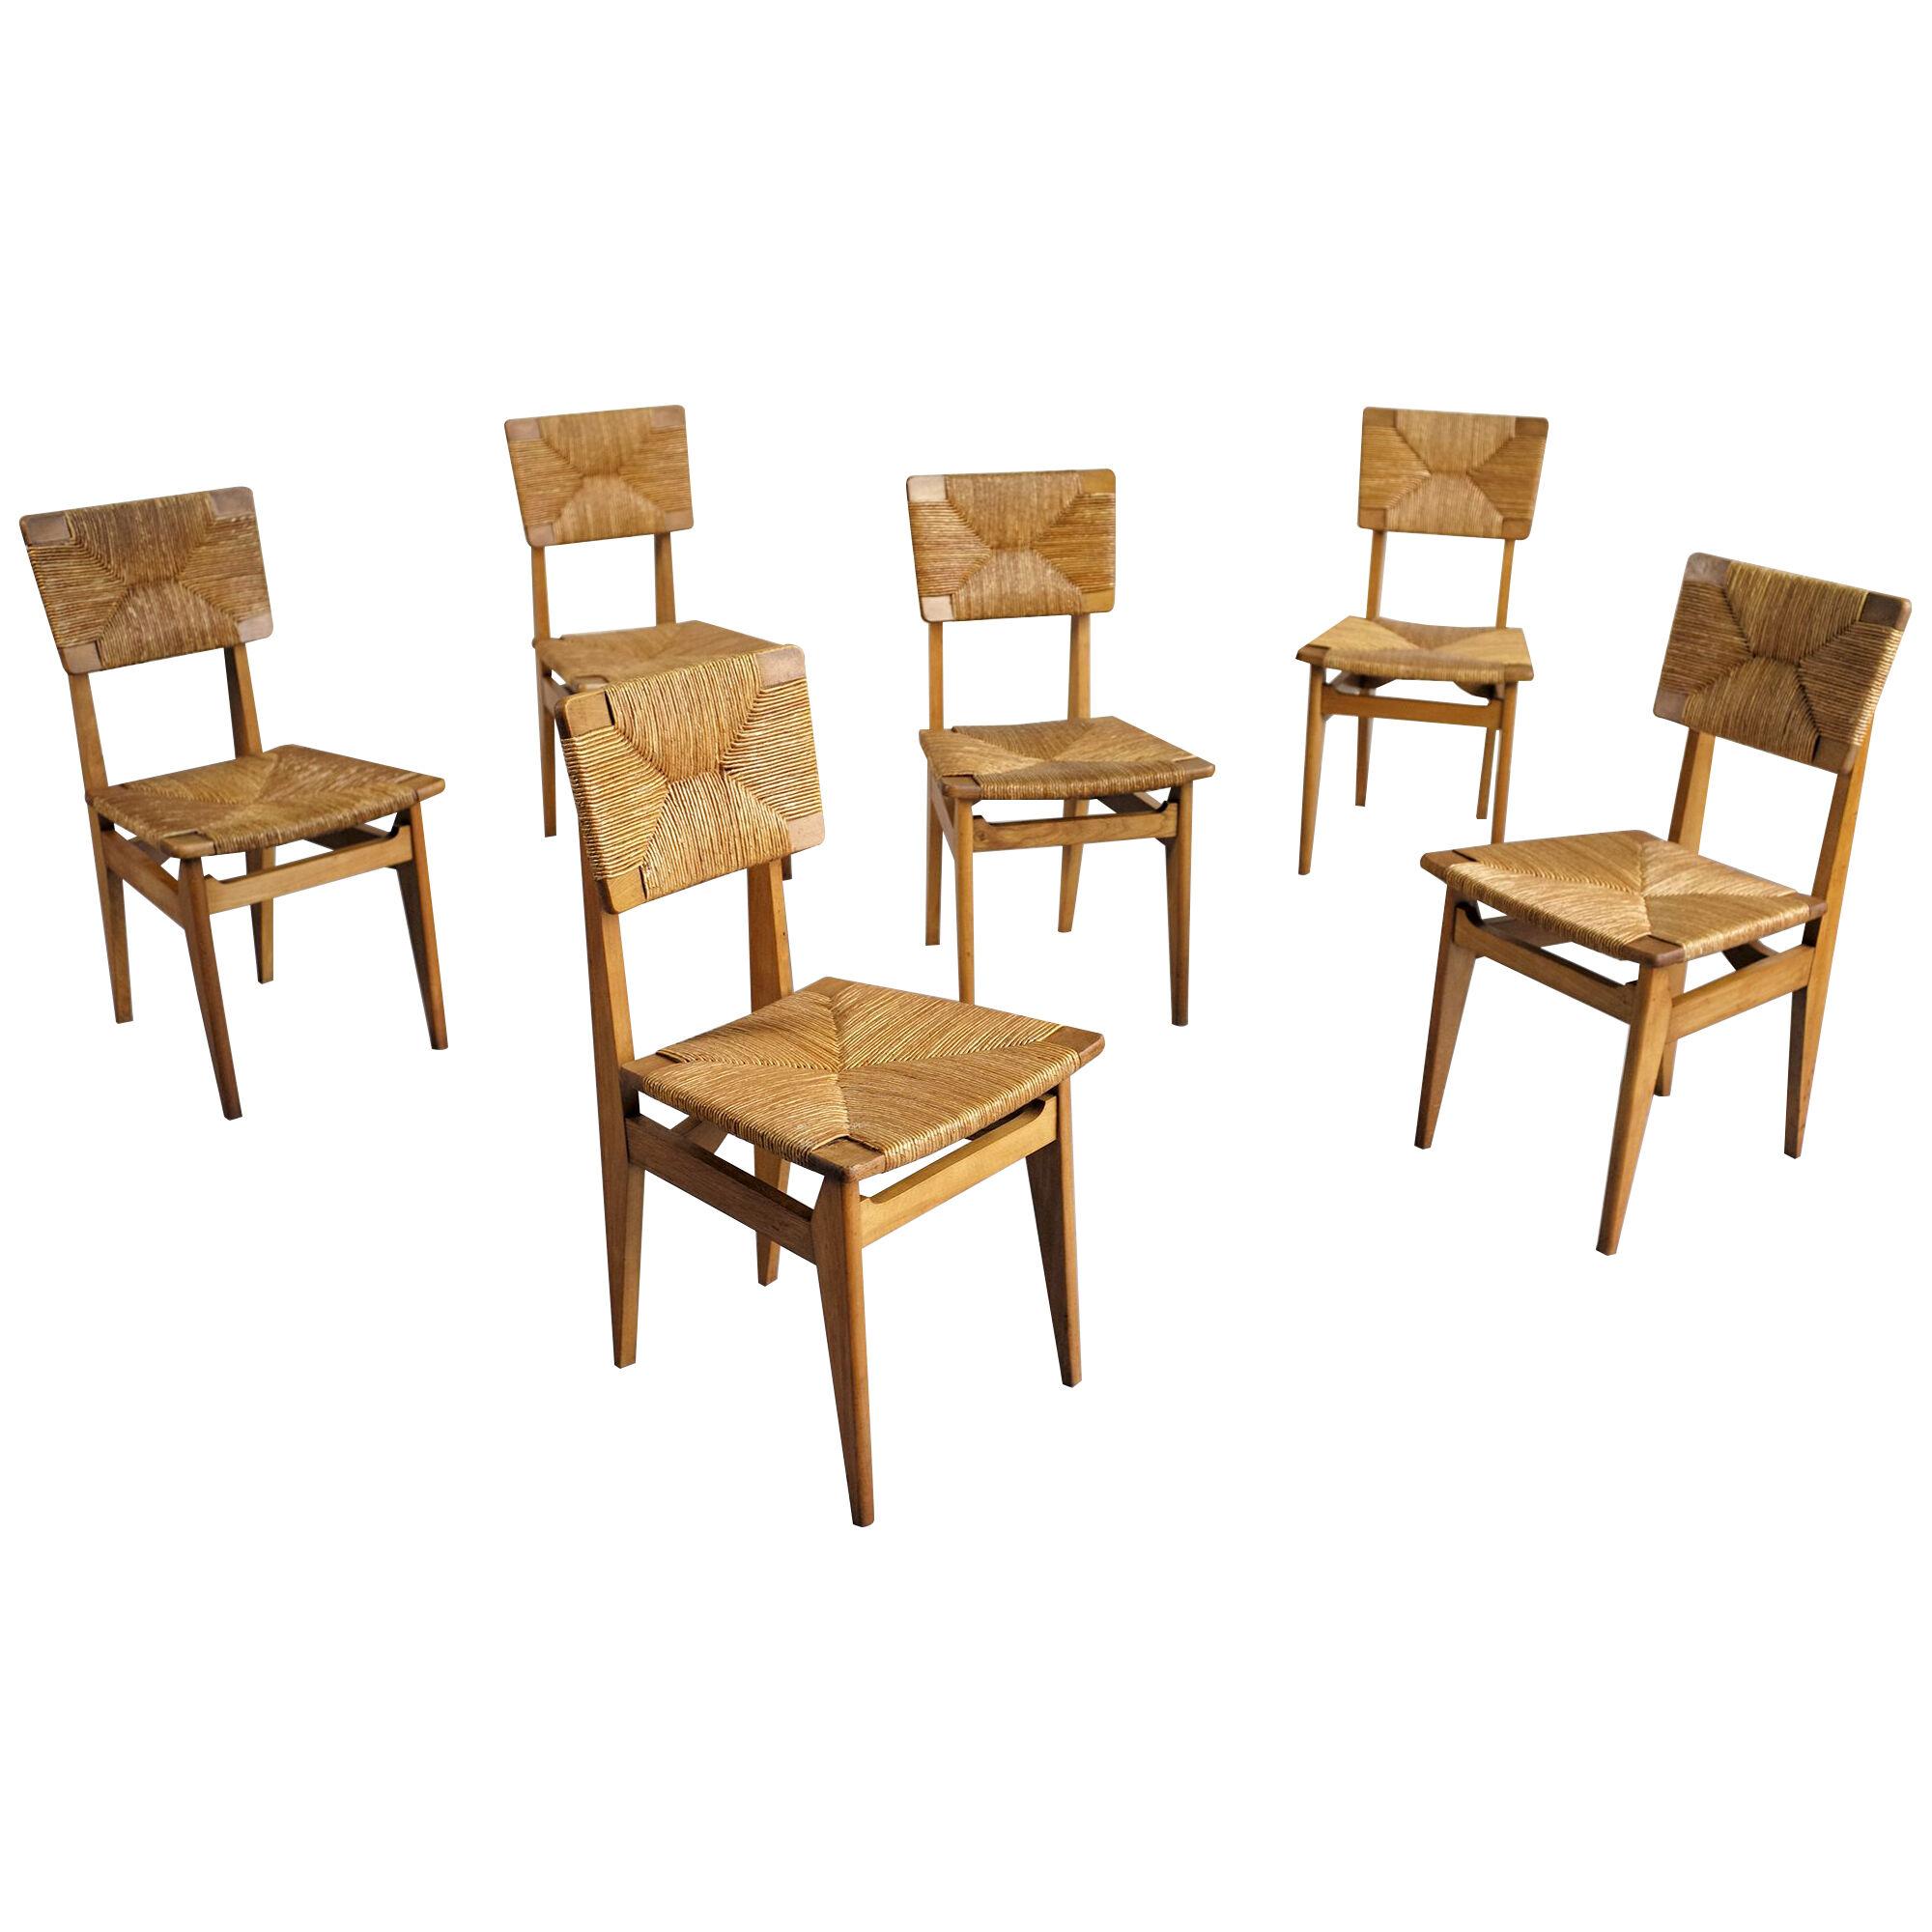 Marcel Gascoin, Series of 6 "CF" Chairs, France, 1950